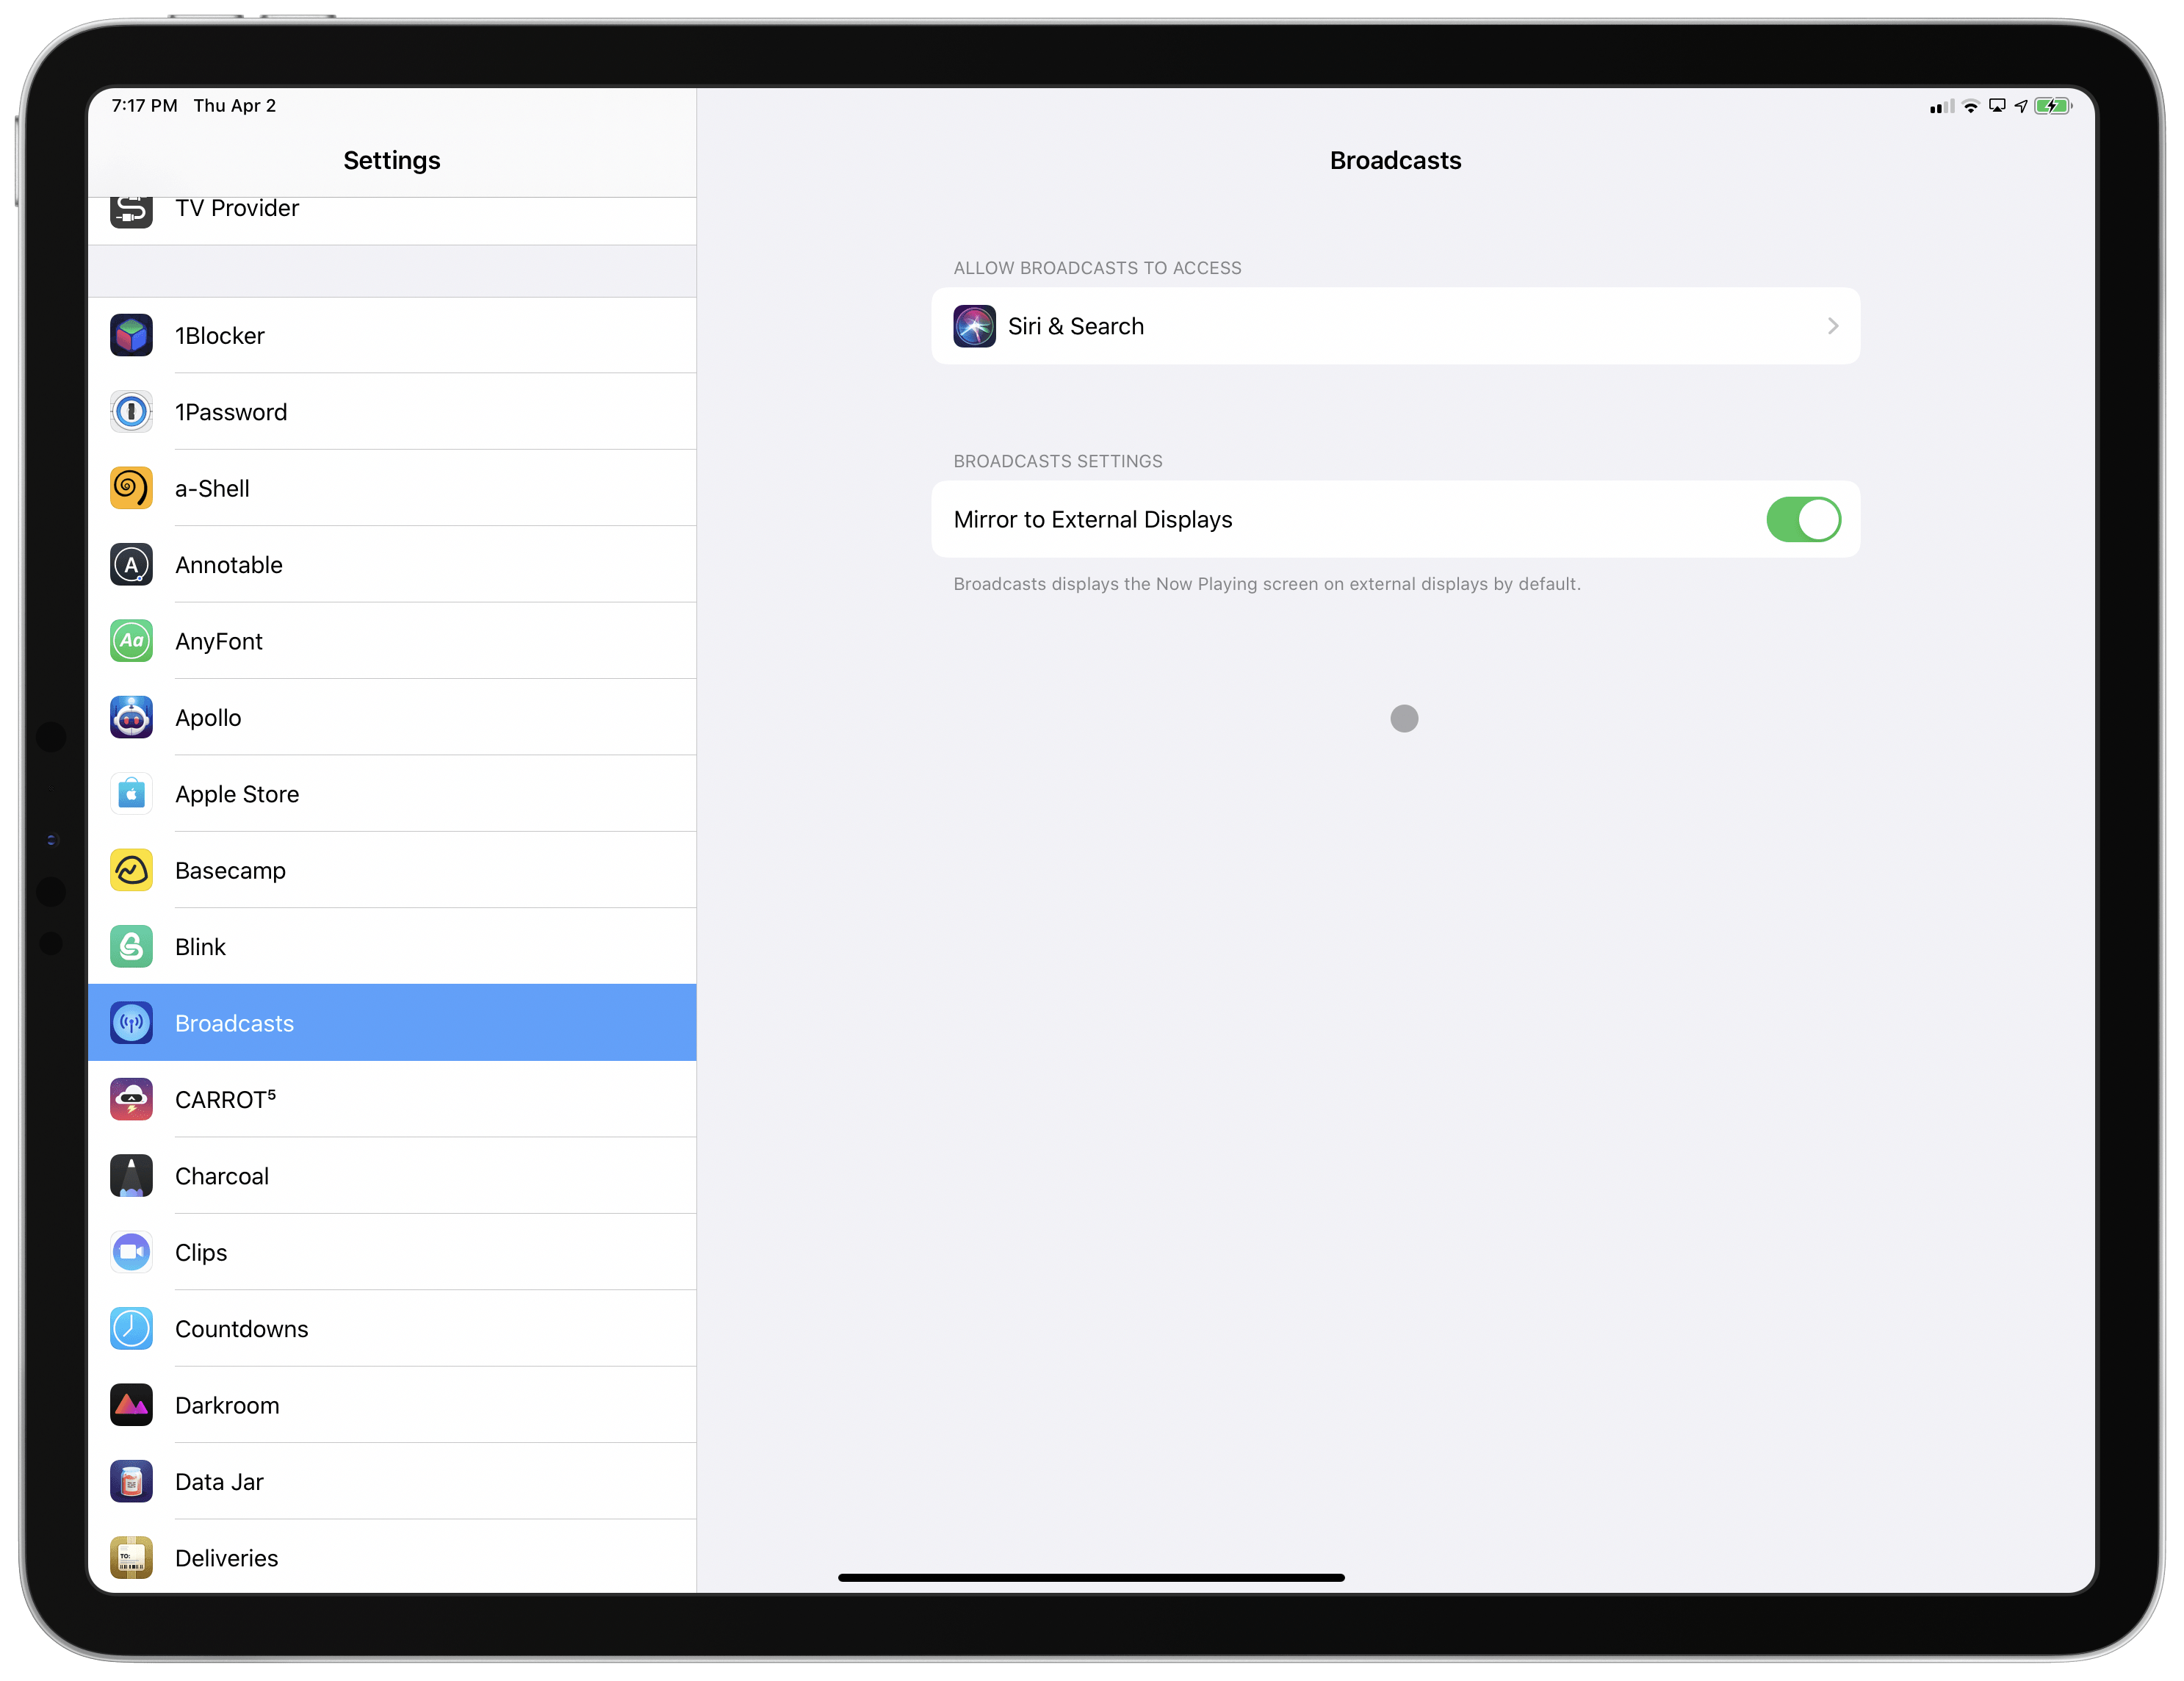 Broadcasts also offers a setting screen to choose whether the app should be mirrored on an external display or output full-screen content. More apps should offer a similar option.